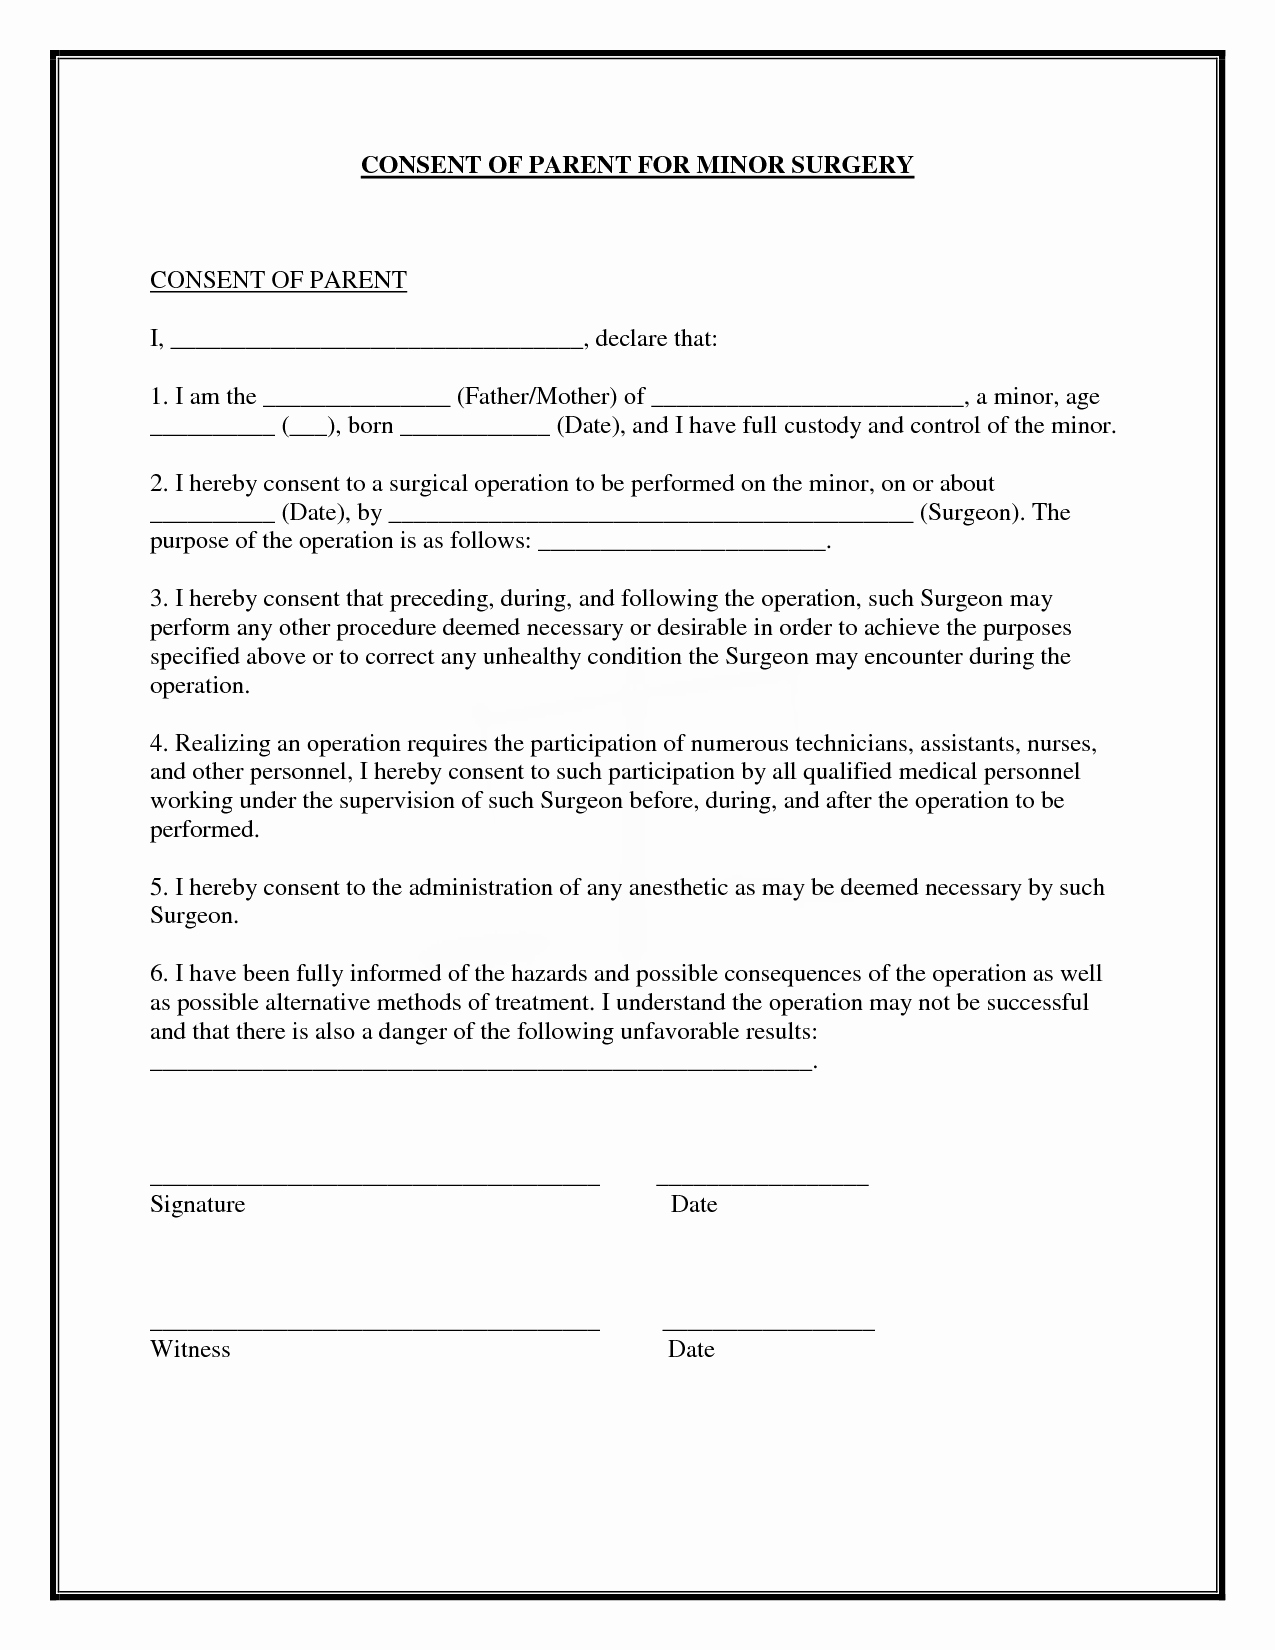 Video Consent form Template Inspirational Surgery Consent forms Templates Consent form